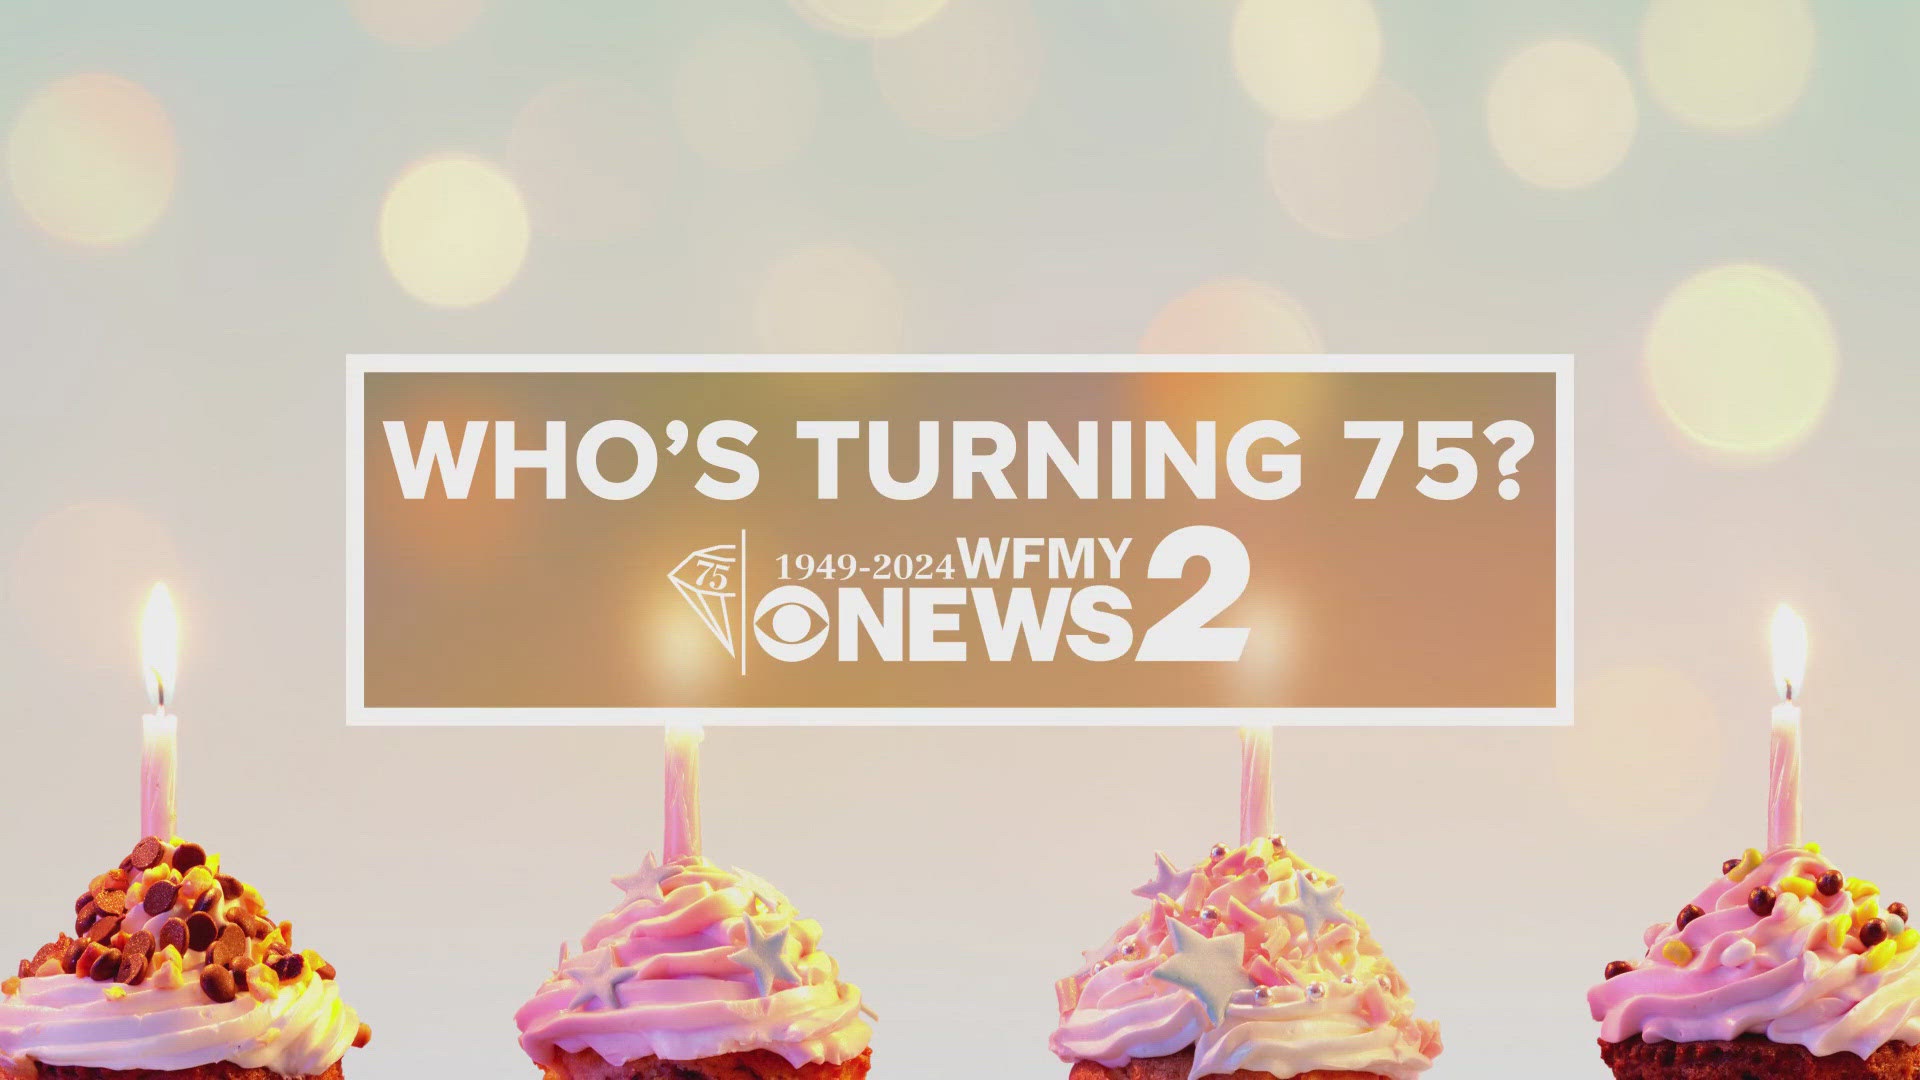 WFMY News 2 is celebrating 75 years and is wishing viewers who turn 75 a Happy Birthday, too.